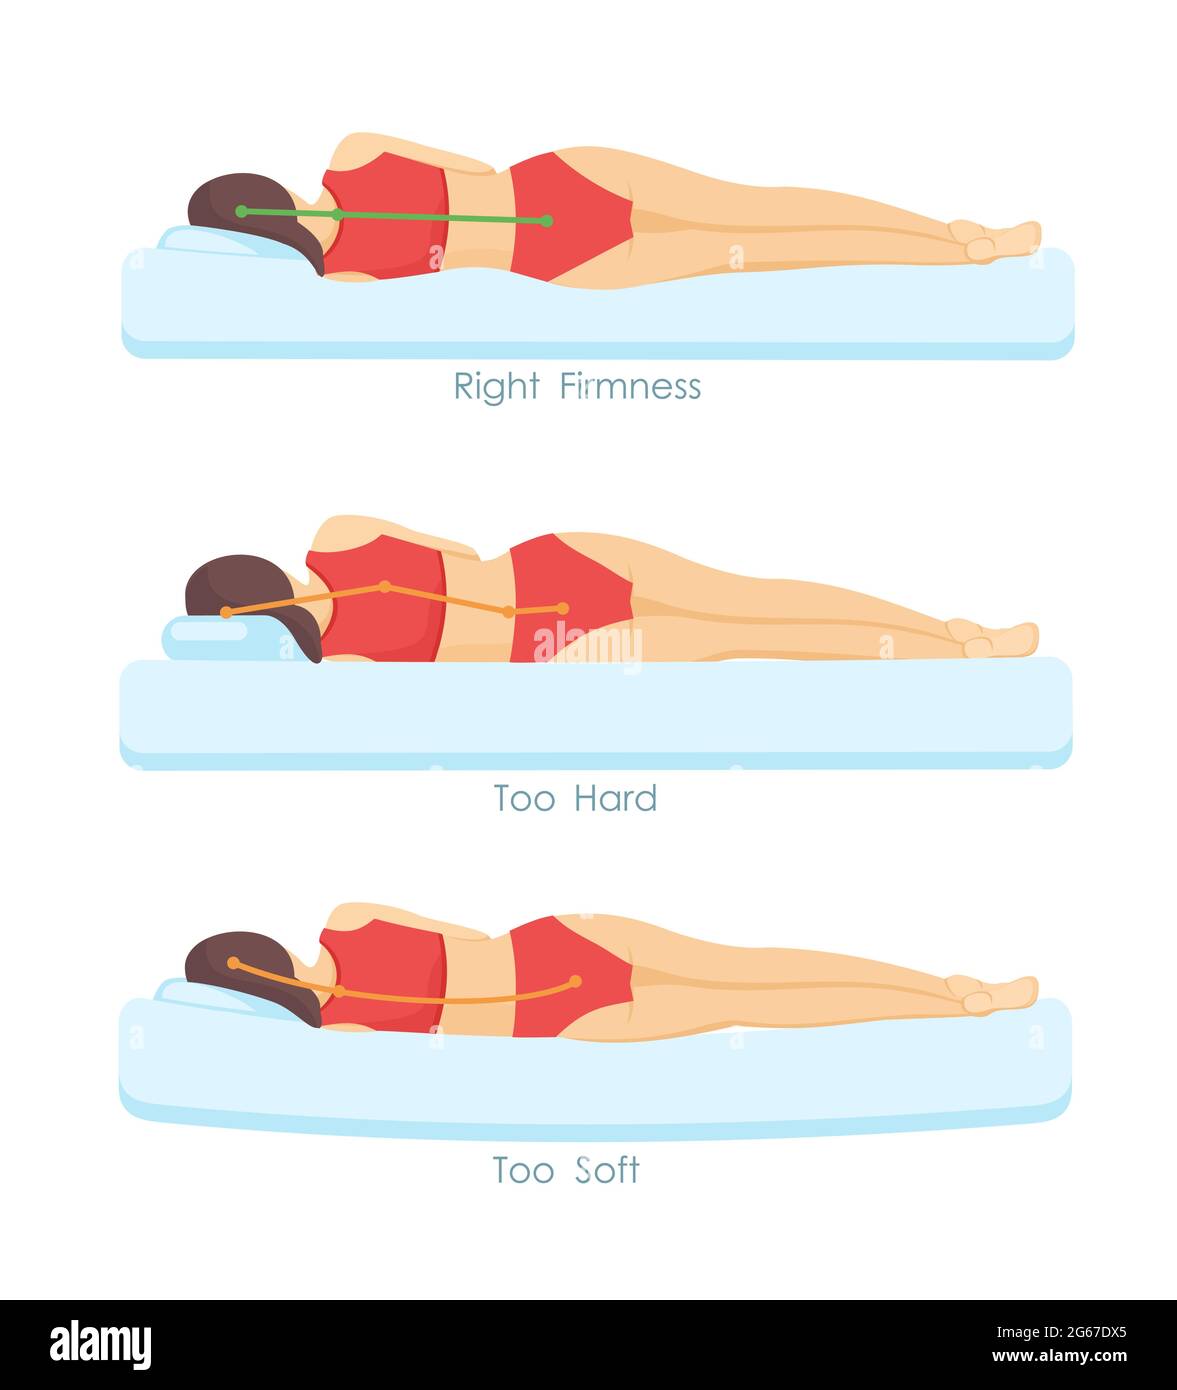 Vector illustration set of correct and incorrect sleeping mattress positions. ergonomics and body posture infographic in flat cartoon style. Stock Vector